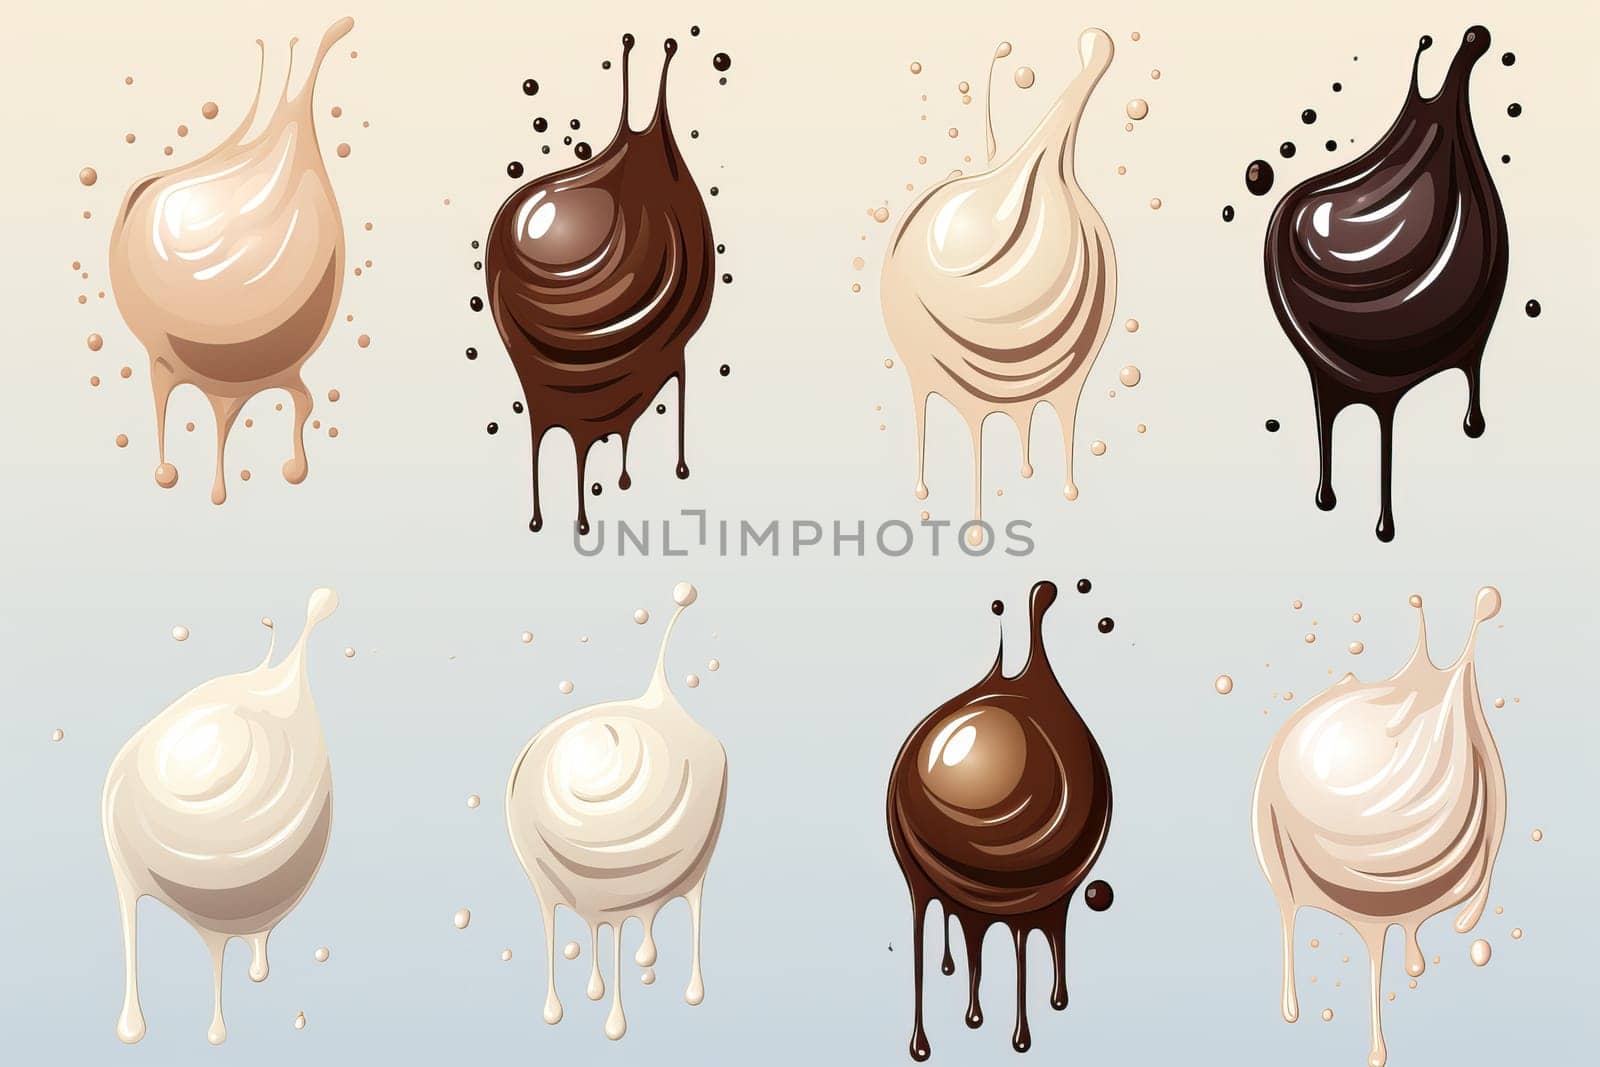 Smeared drops of chocolate on a white background by Niko_Cingaryuk